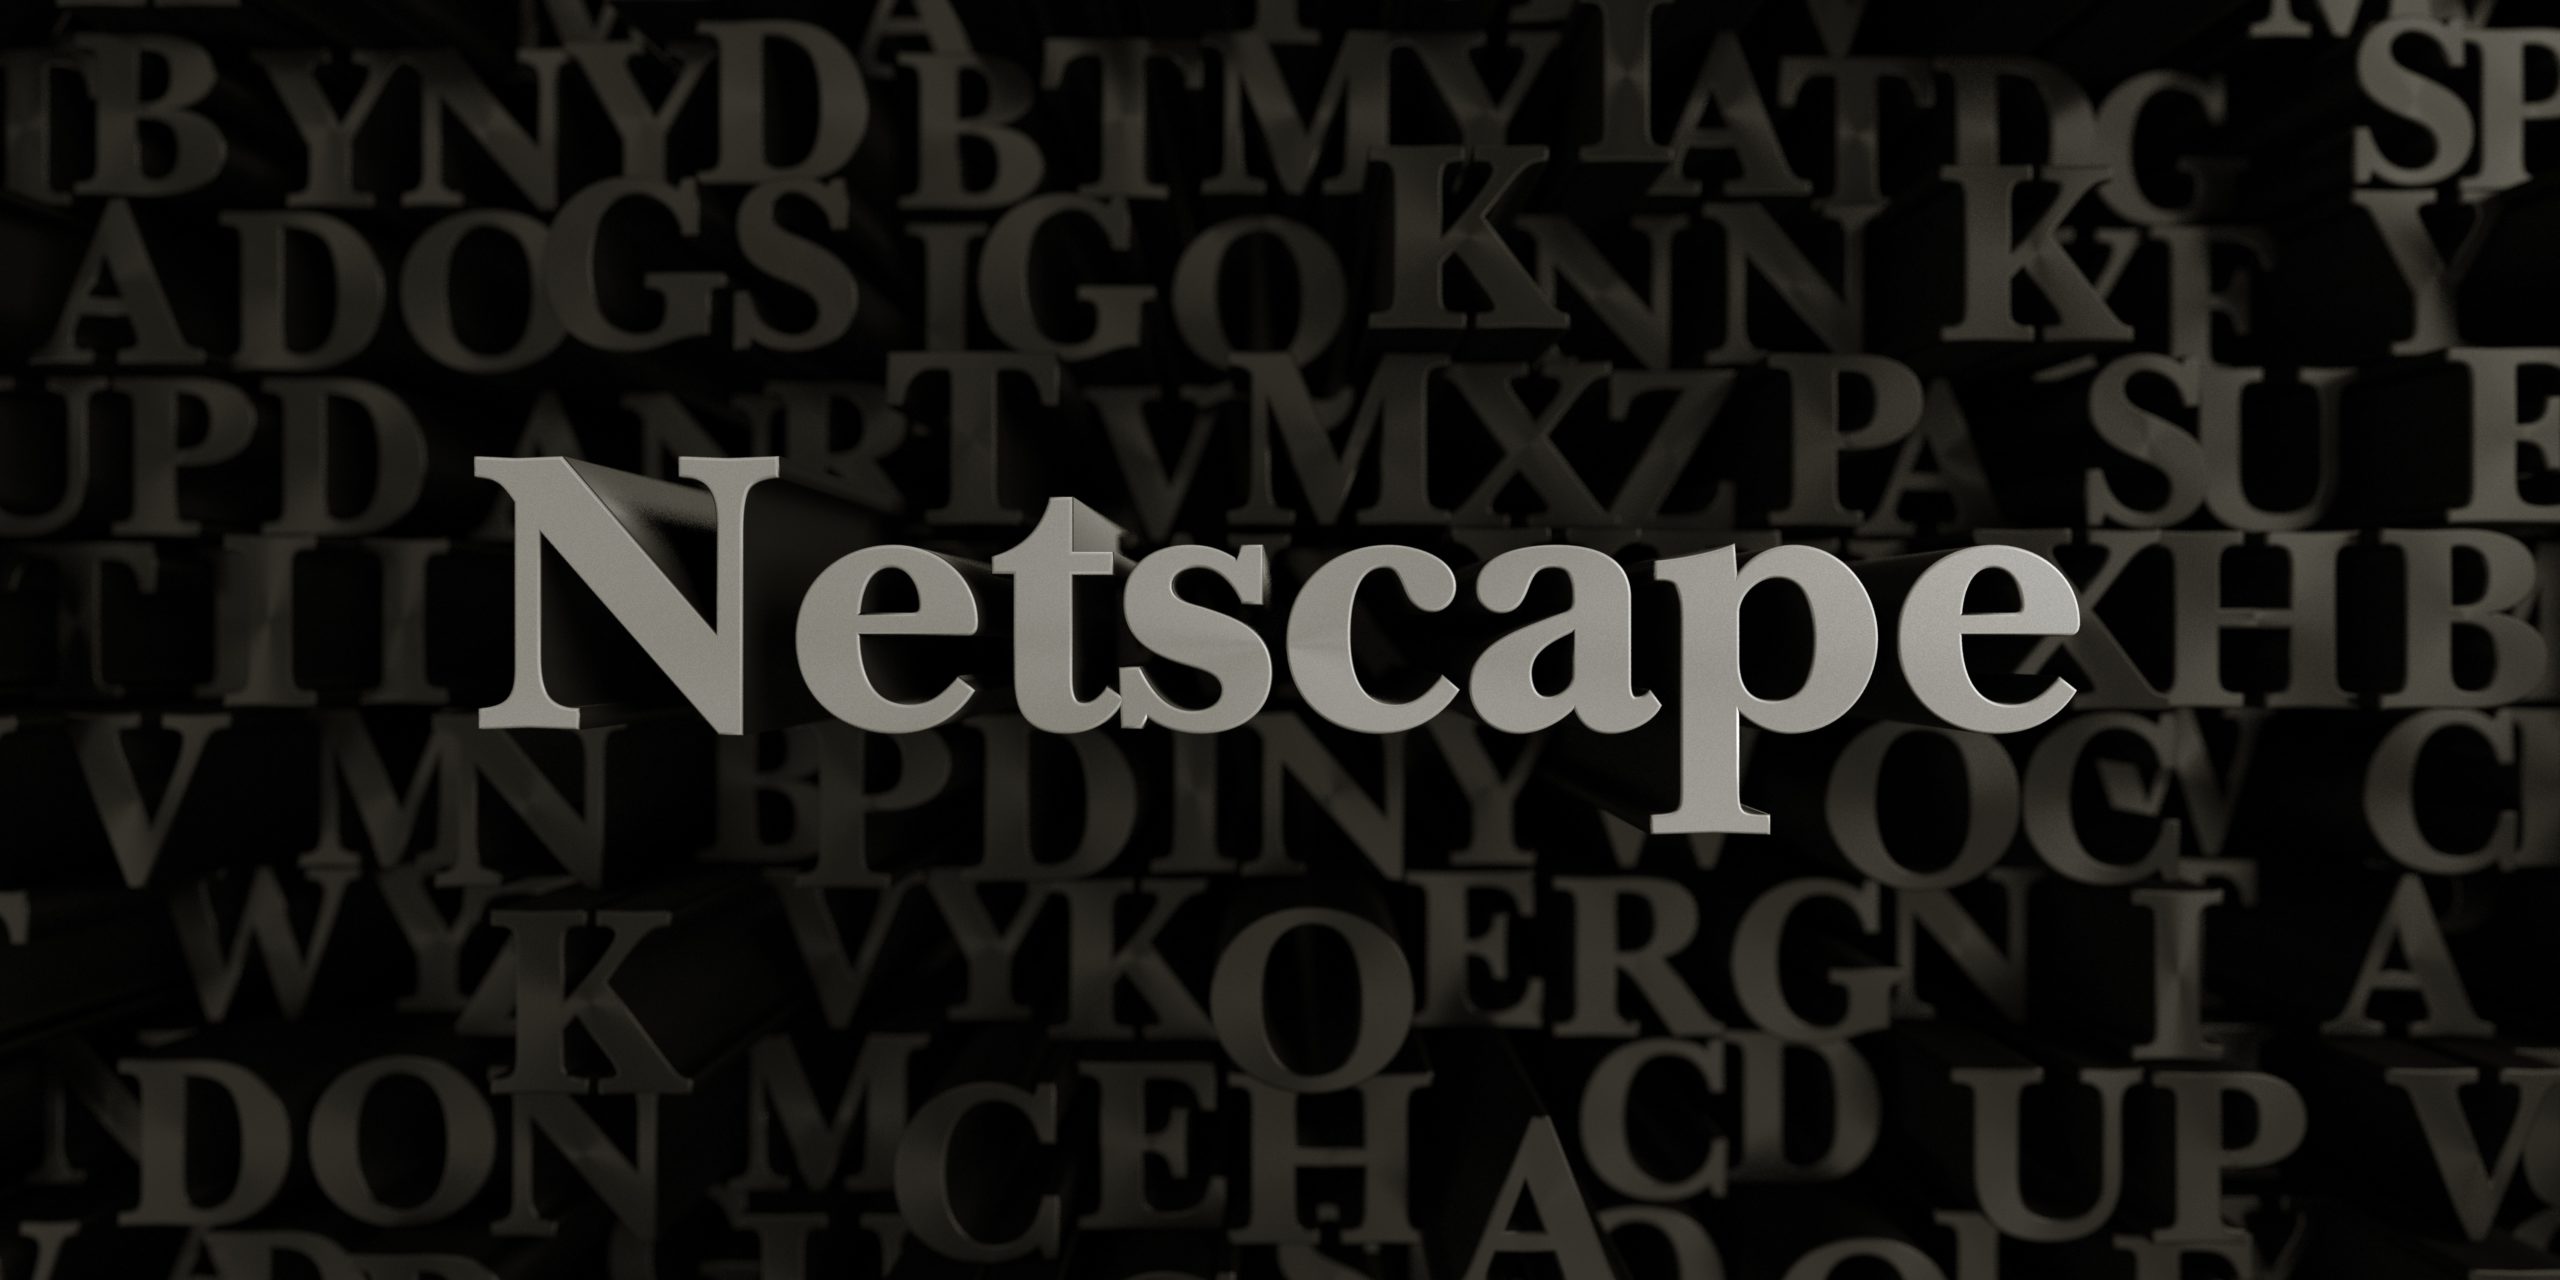 Netscape - Stock image of 3D rendered metallic typeset headline illustration.  Can be used for an online banner ad or a print postcard.